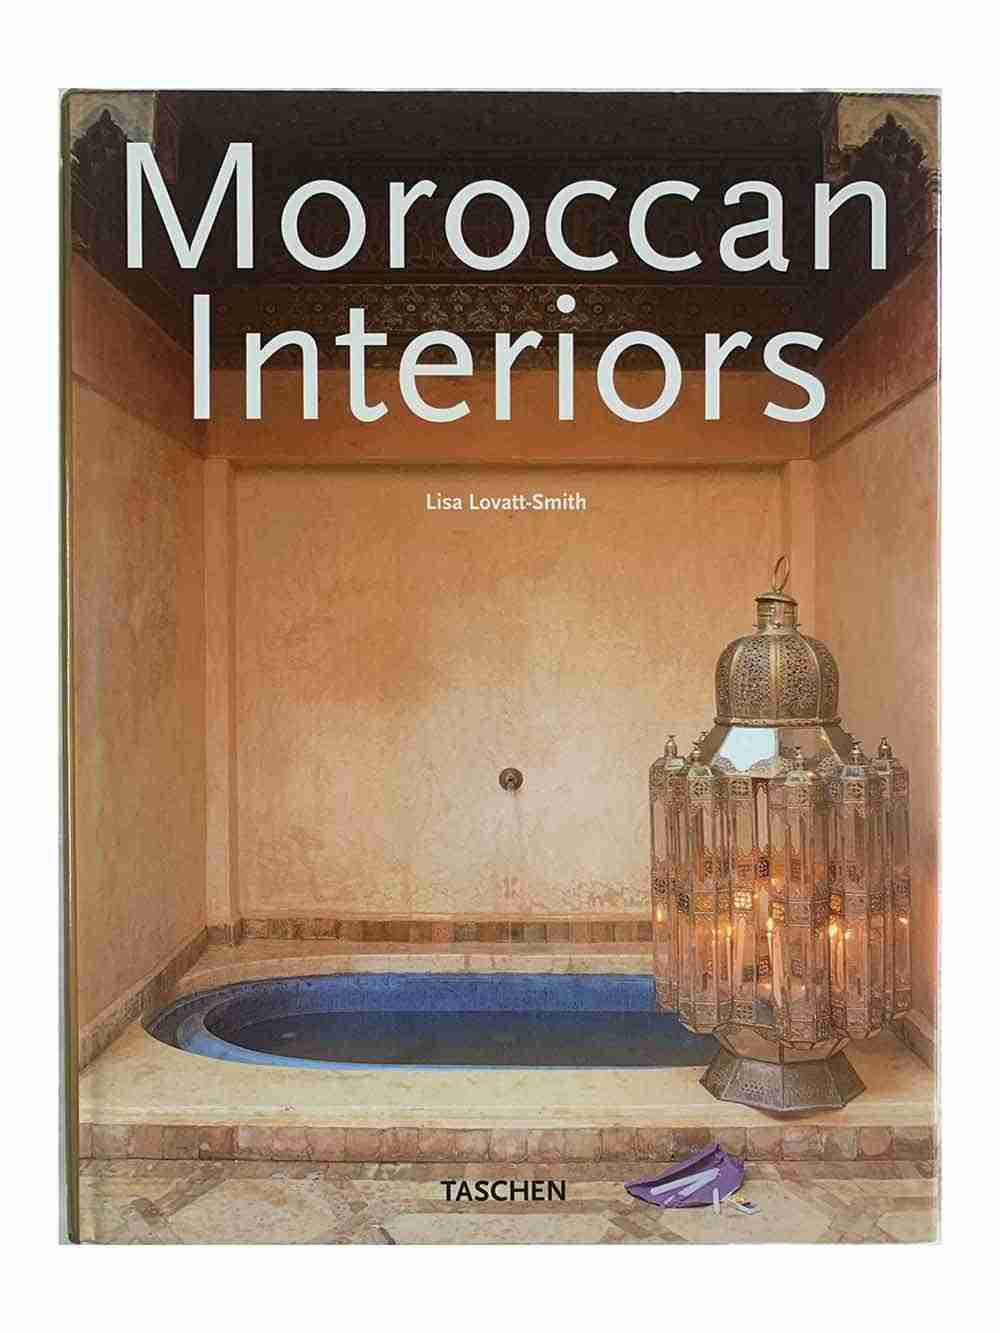 books by moroccan authors